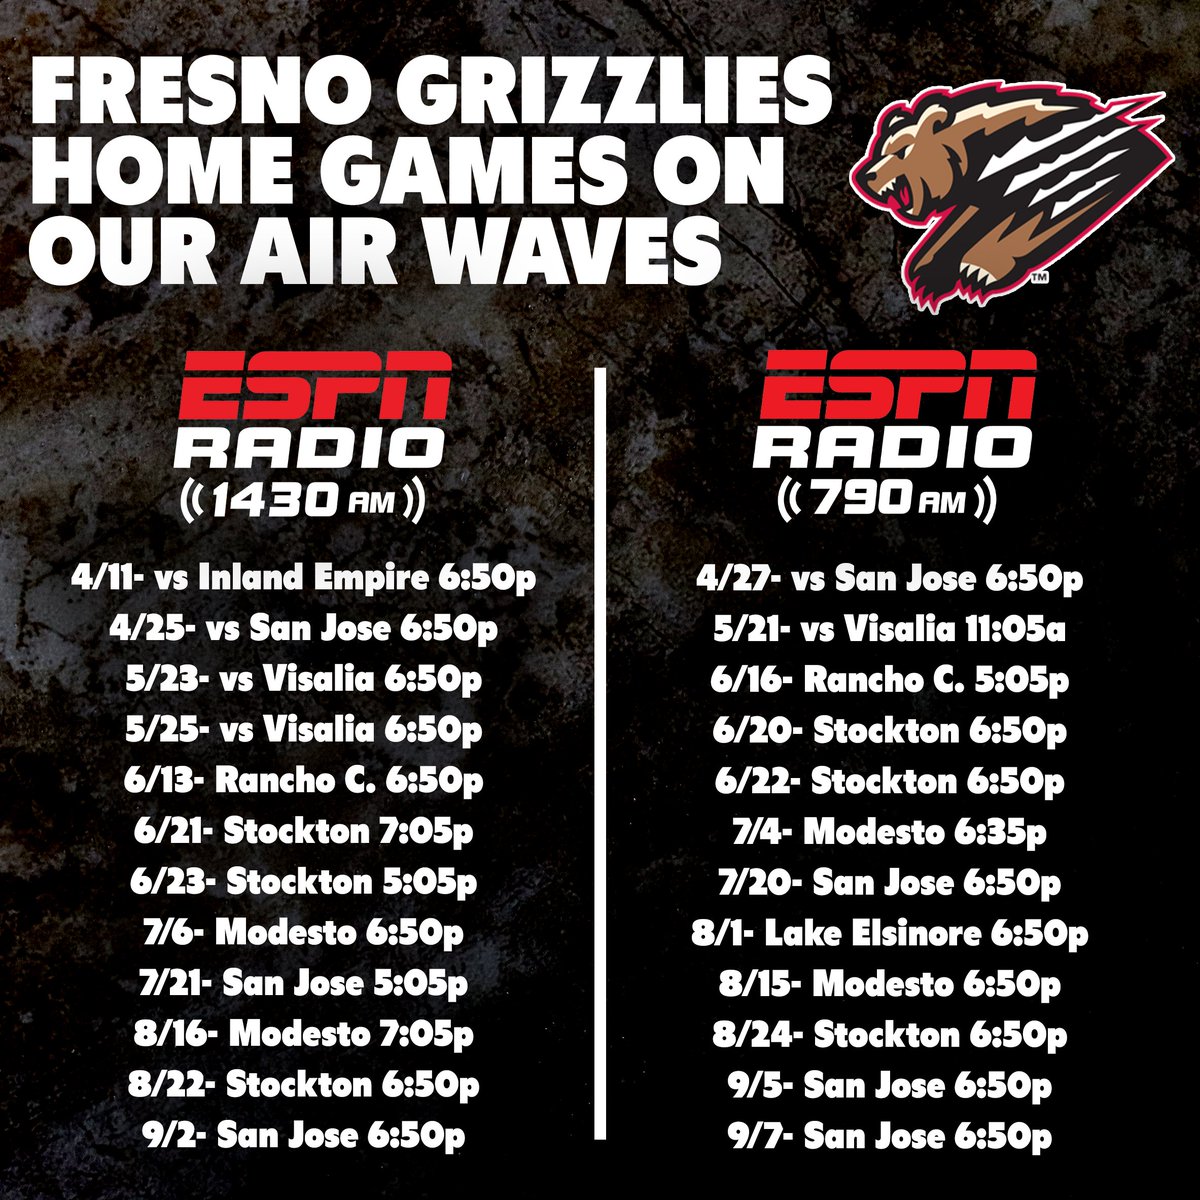 We are excited to announce ESPN Radio Fresno will be airing selected Fresno Grizzlies home games. Starting this Thursday April 11 we will have 12 games on 1430AM and another 12 games on 790AM. Keep it with us and listen to an exciting season of Fresno Grizzlies baseball.